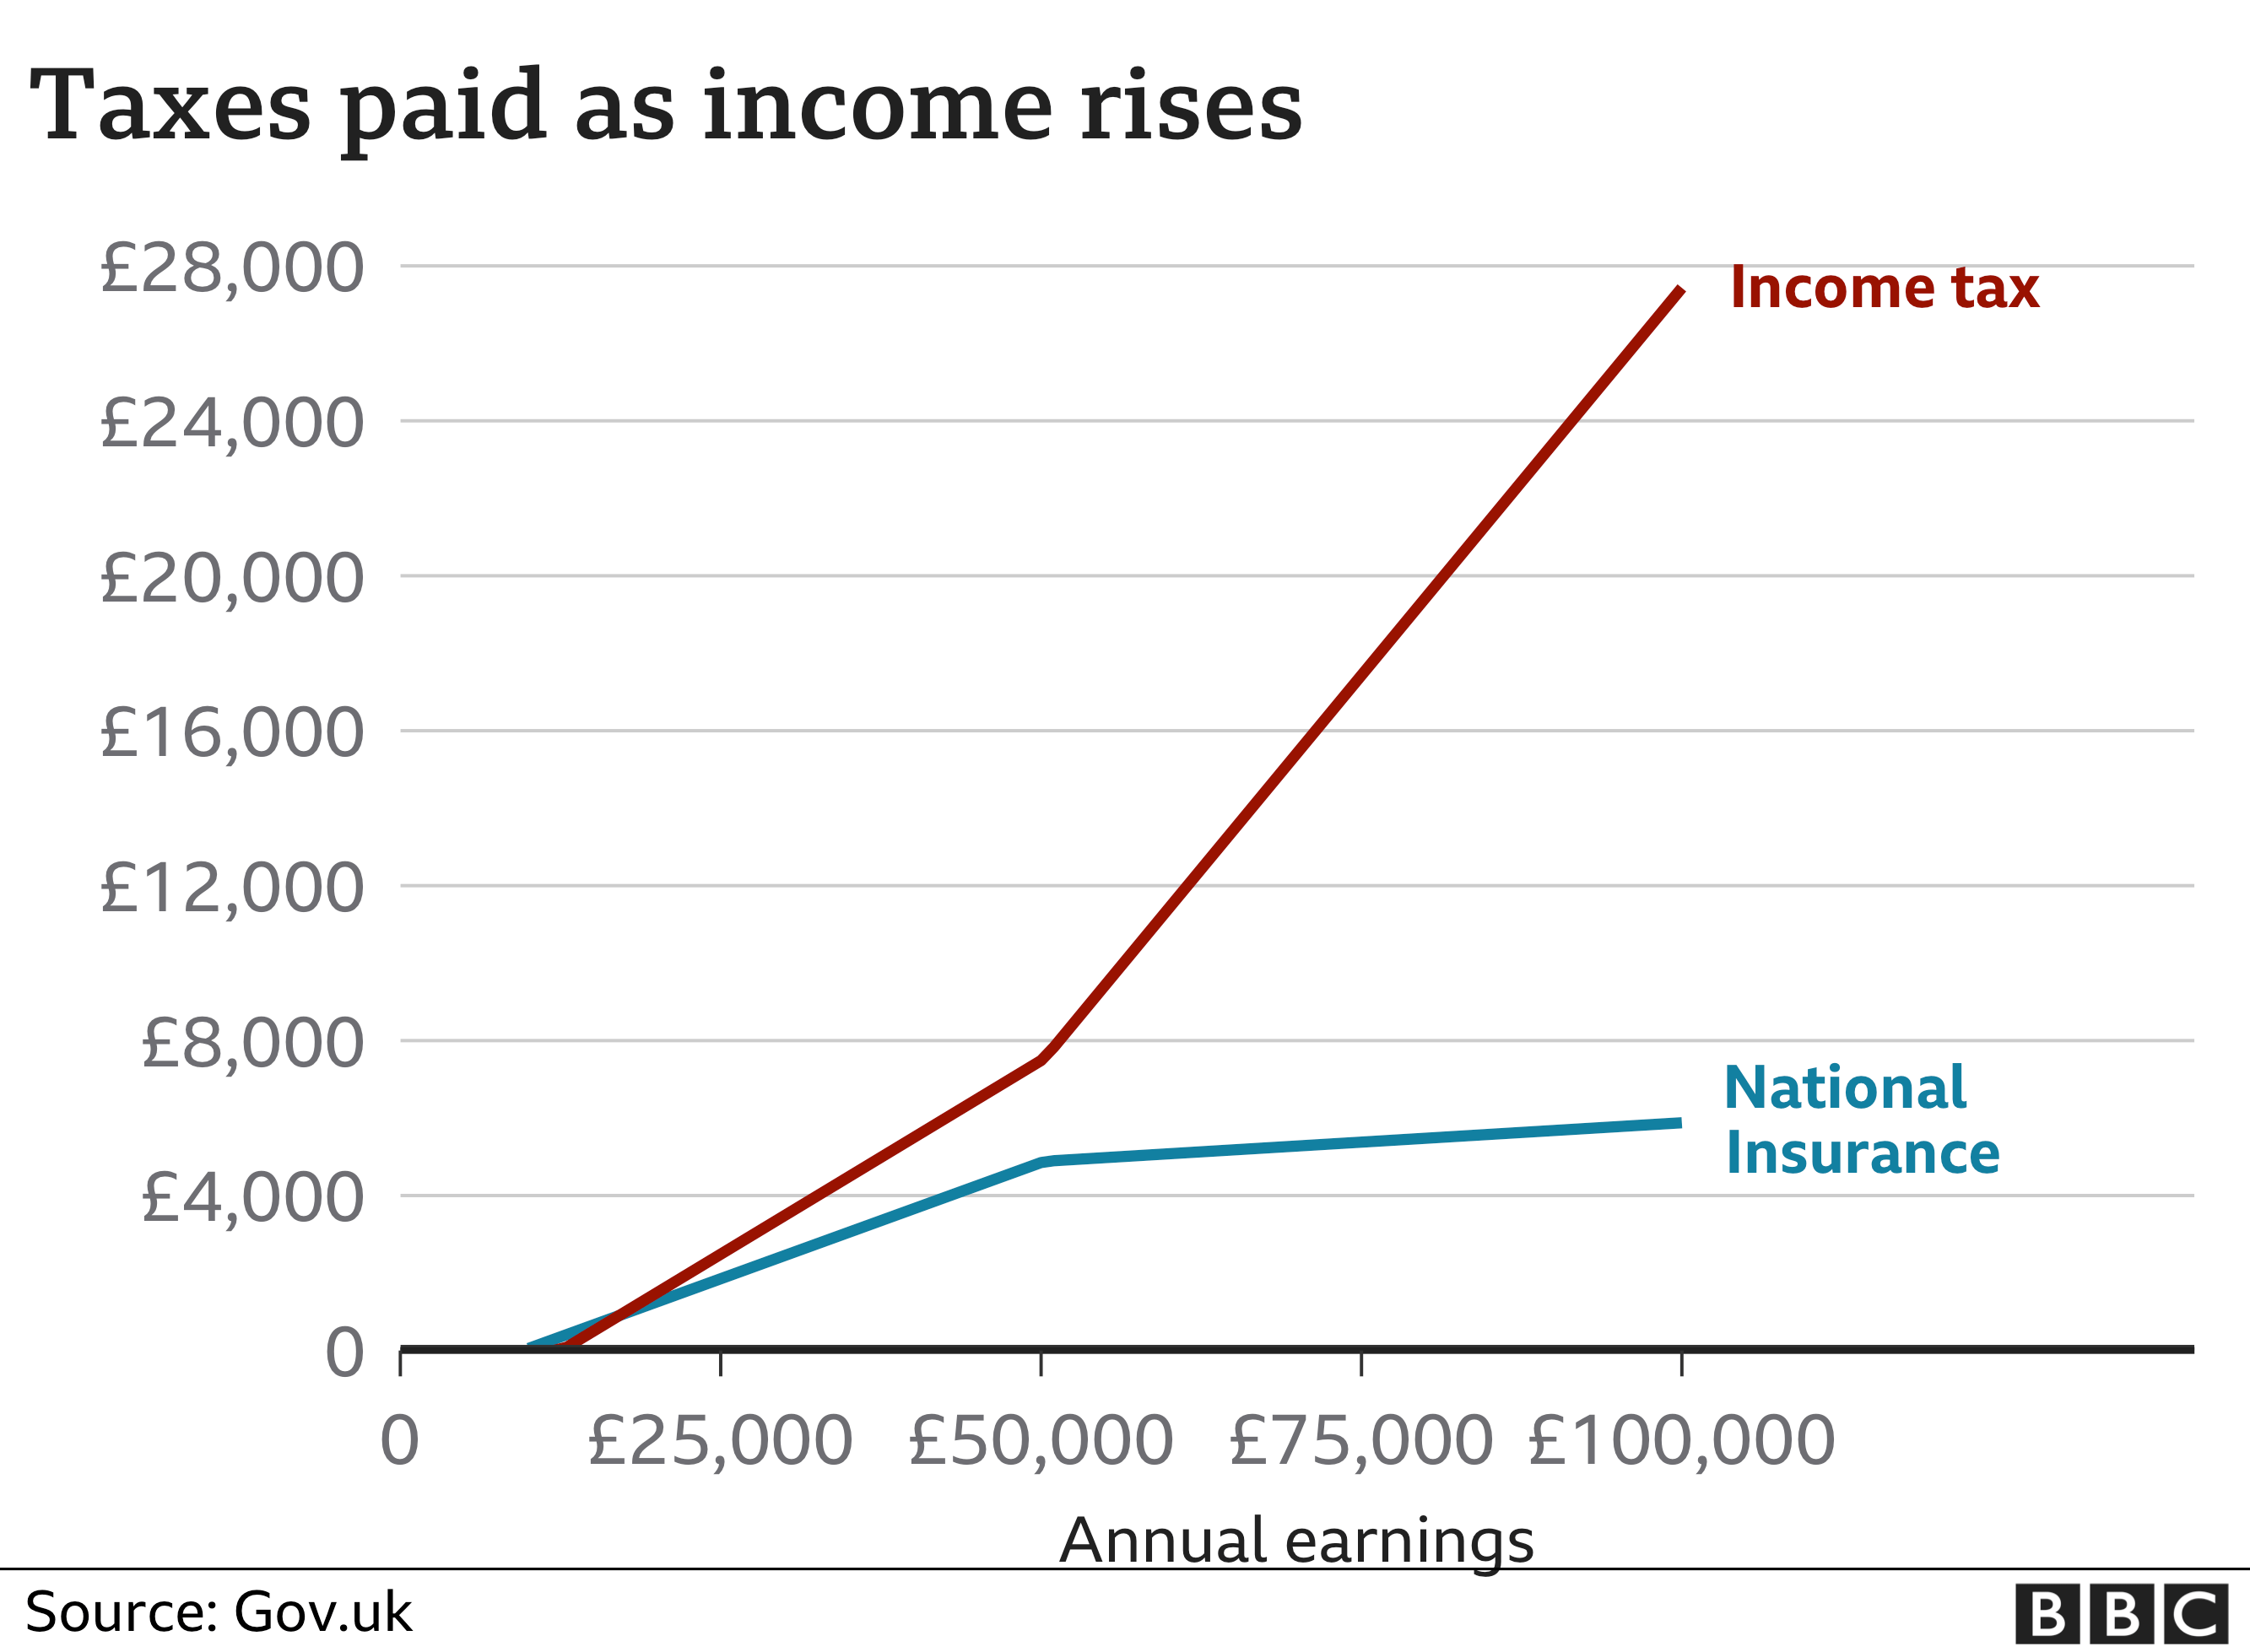 BBC graph of absolute tax rates vs. income